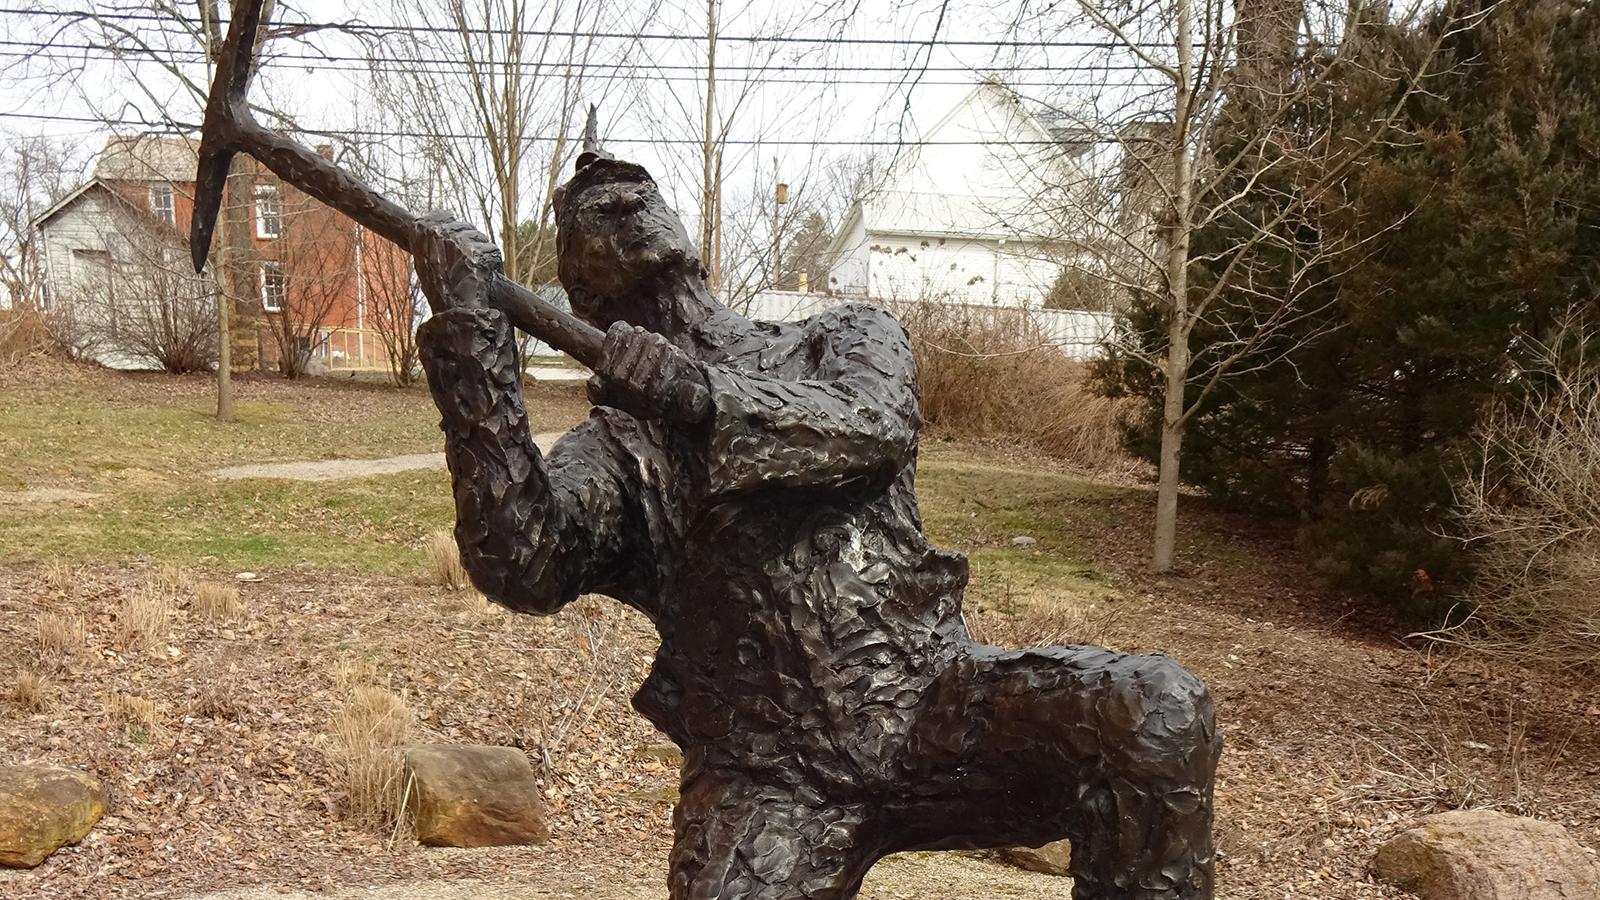 A view of the miner statue in downtown Shawnee, Ohio.